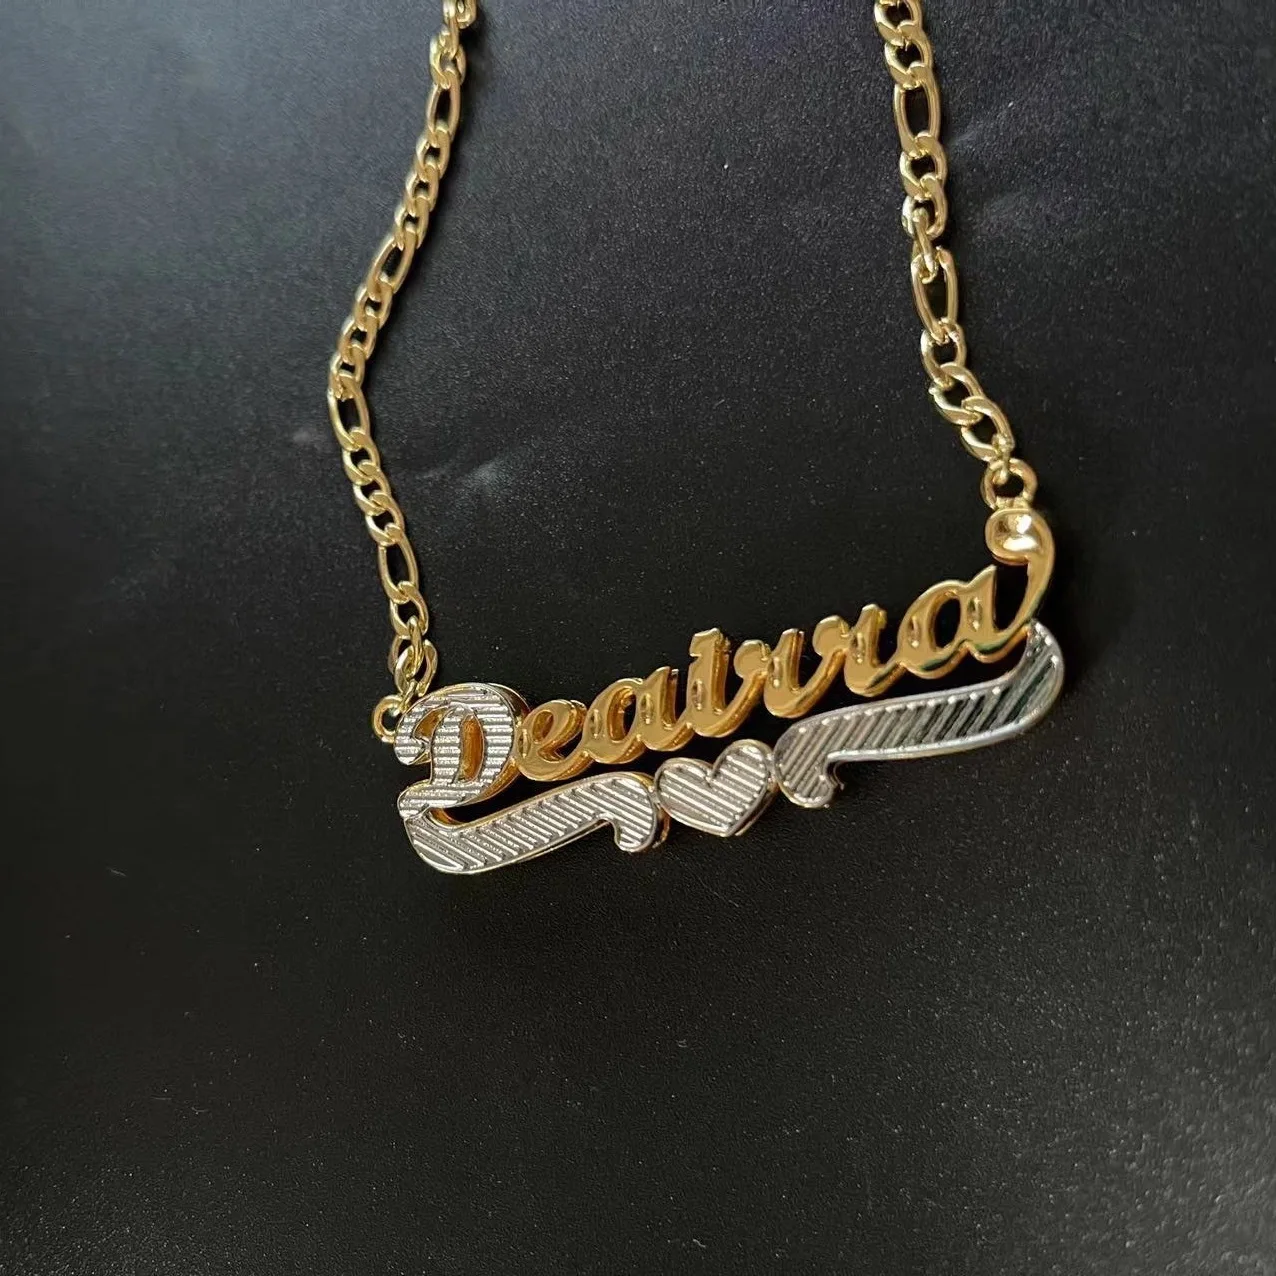 Custom Name Necklace Double Plate Name Chain Two Color Name Necklaces Stainless Steel Cuban Chain Name for Women Birthday's Gift